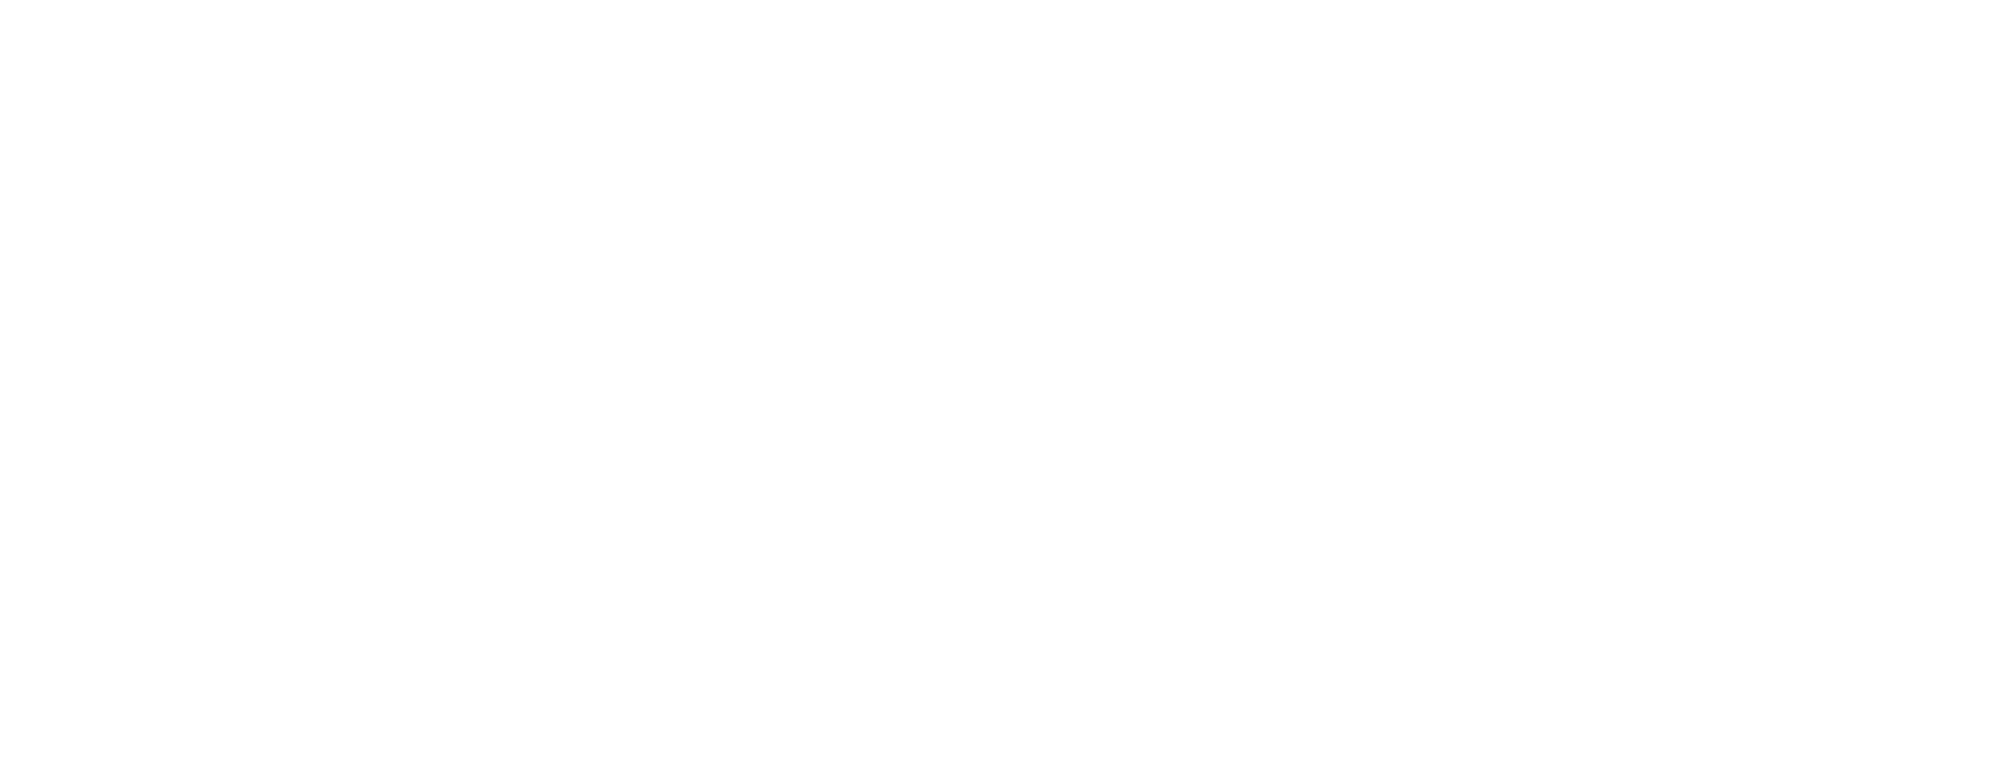 OpenFF Toolkit 0.14.2+0.gbe02f7f.dirty documentation logo